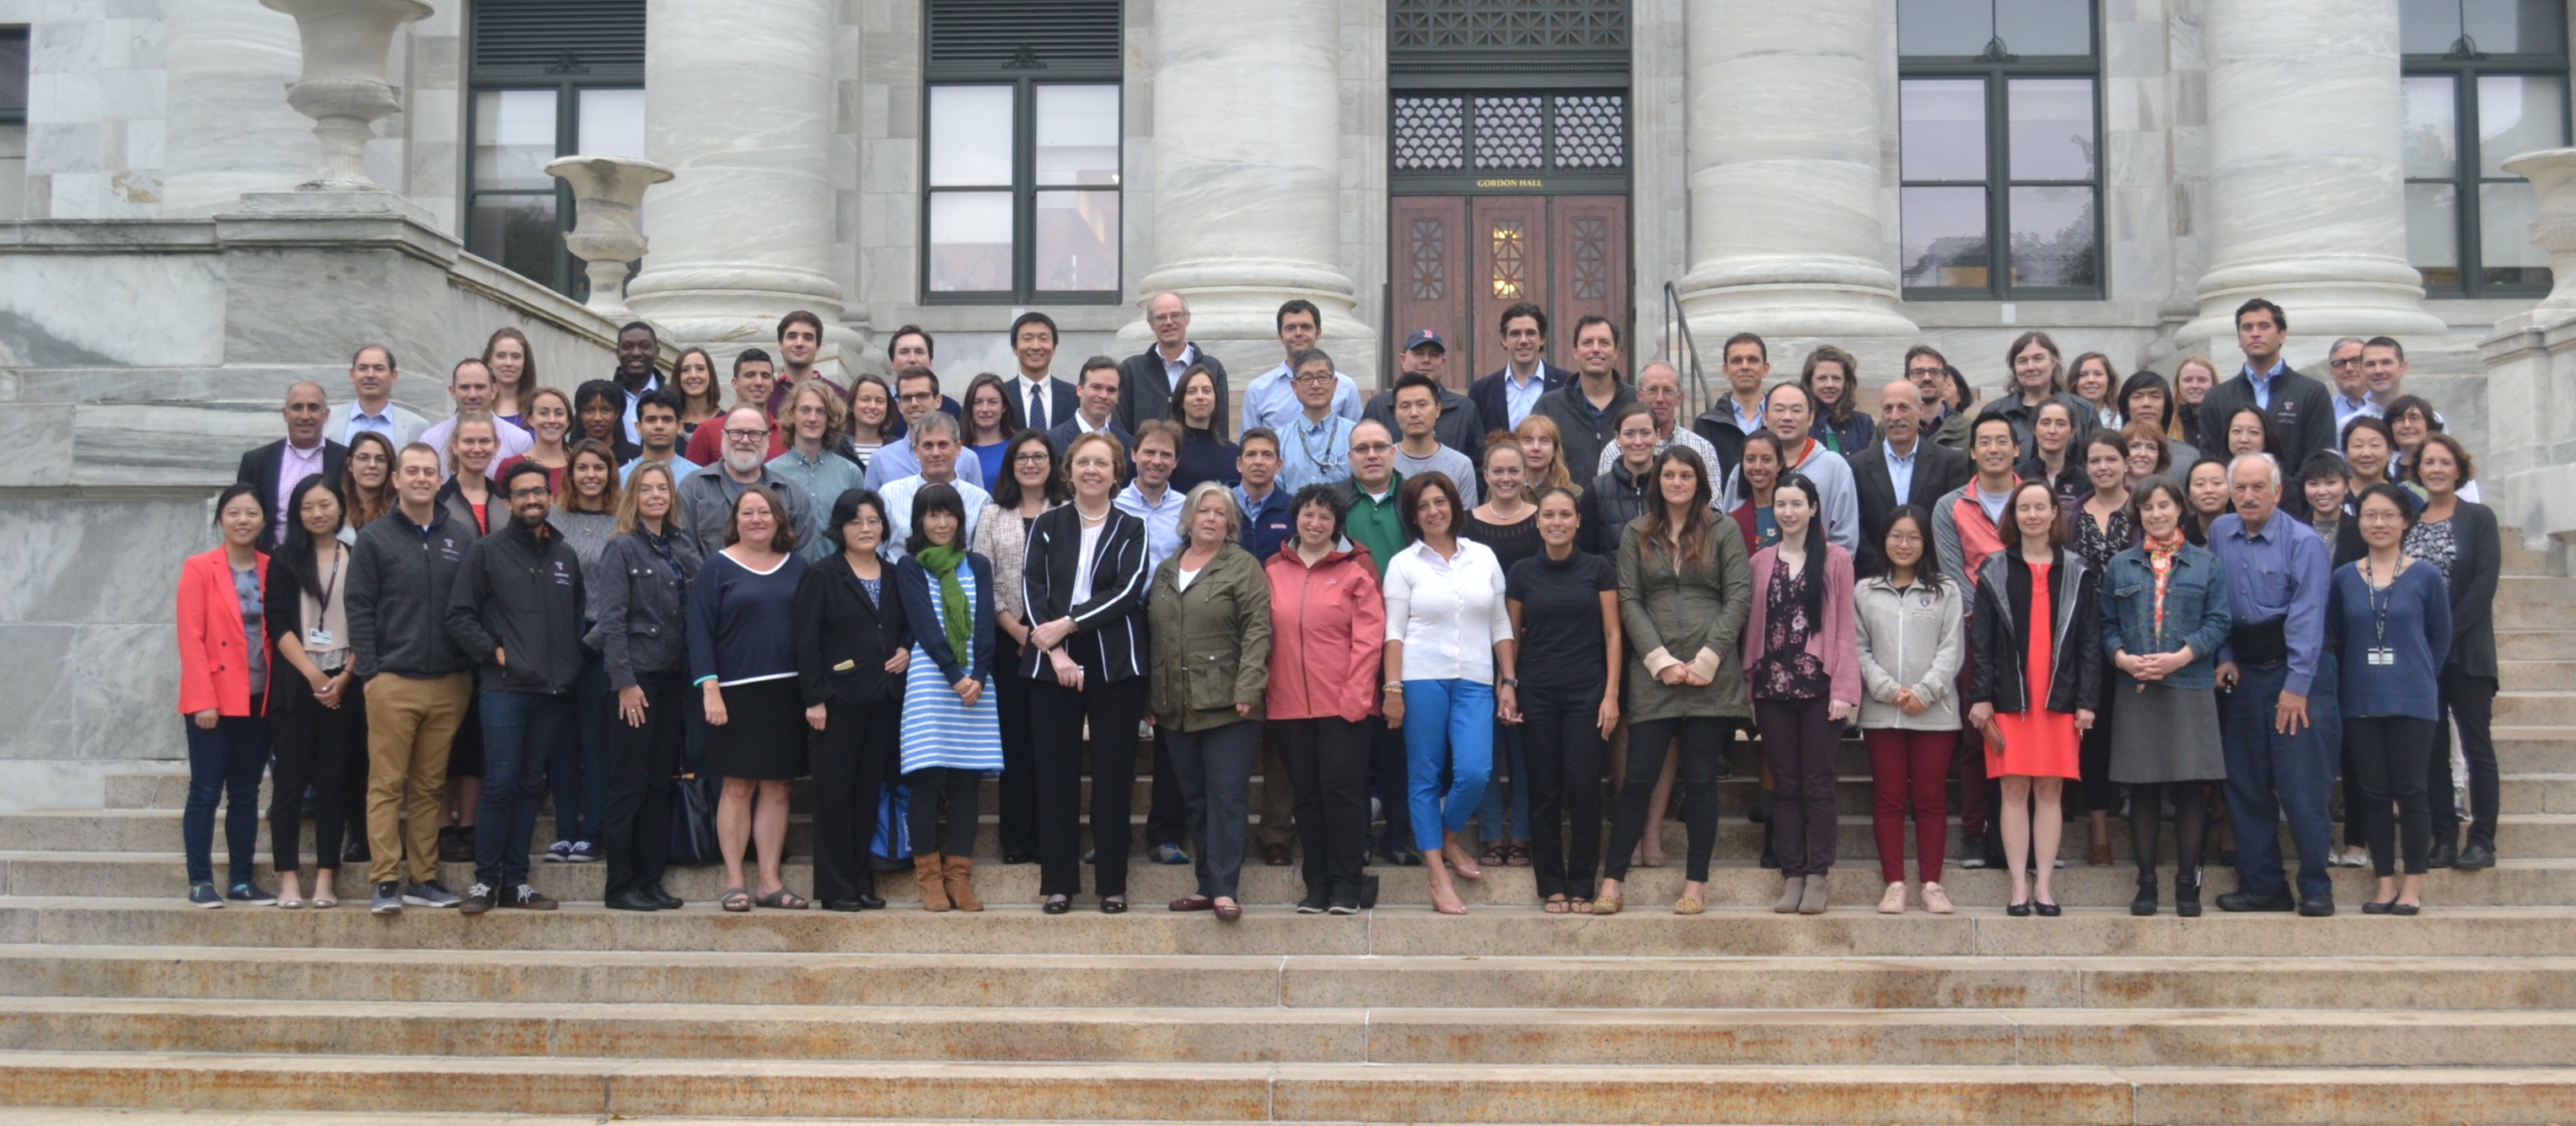 The faculty and staff of the Department of Health Care Policy